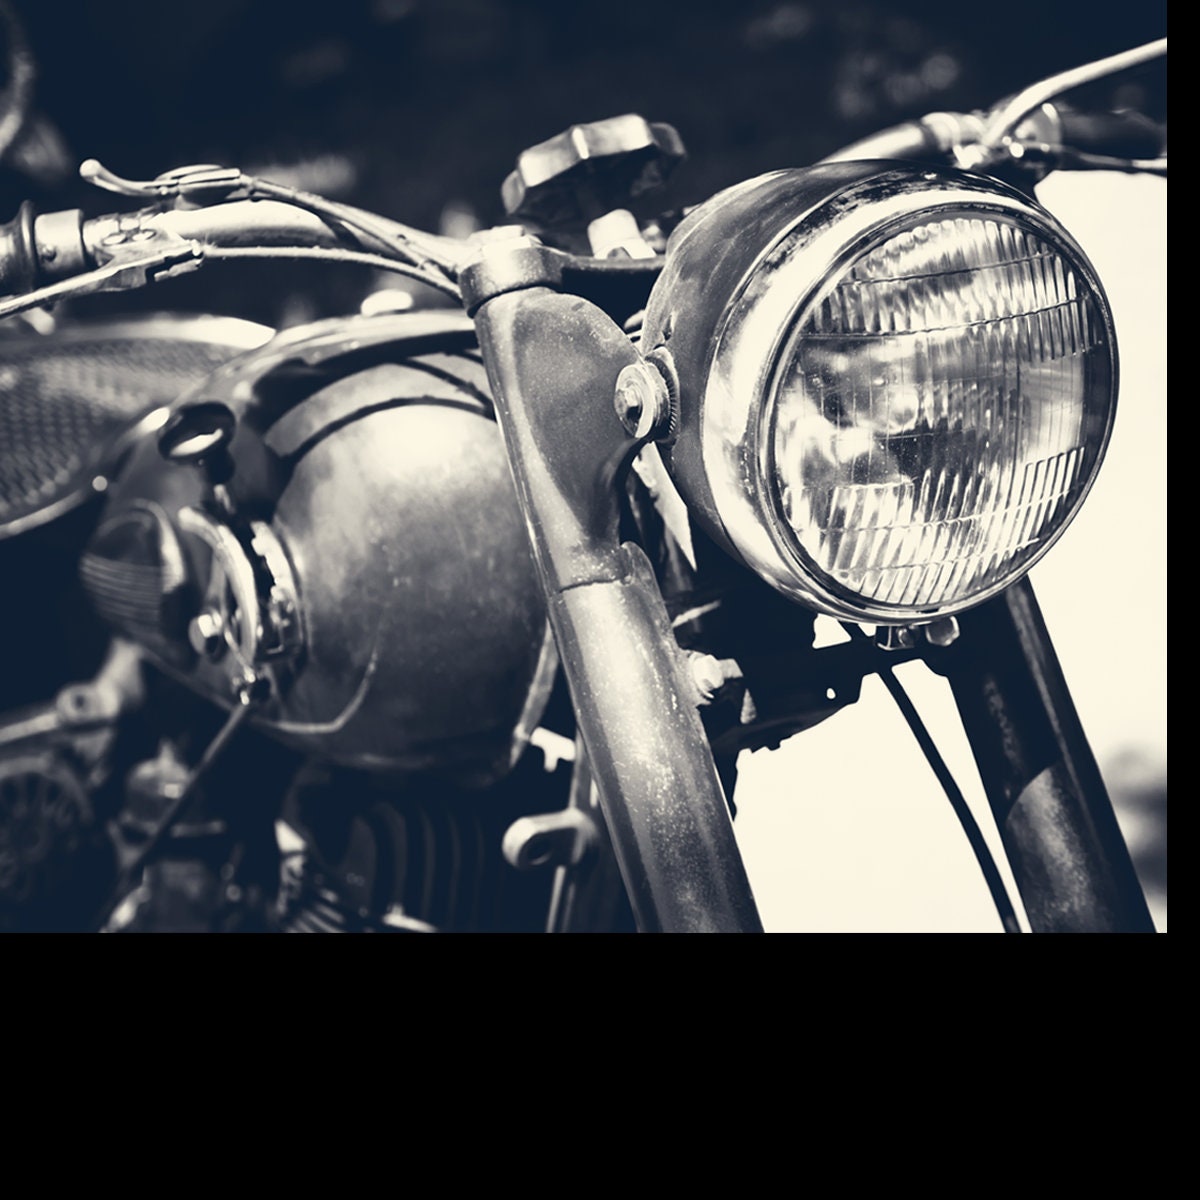 Vintage Motorbike, Focus on a Headlamp. Retro Motorcycle with Headlight on Black and White Color Wallpaper Boy Bedroom Mural